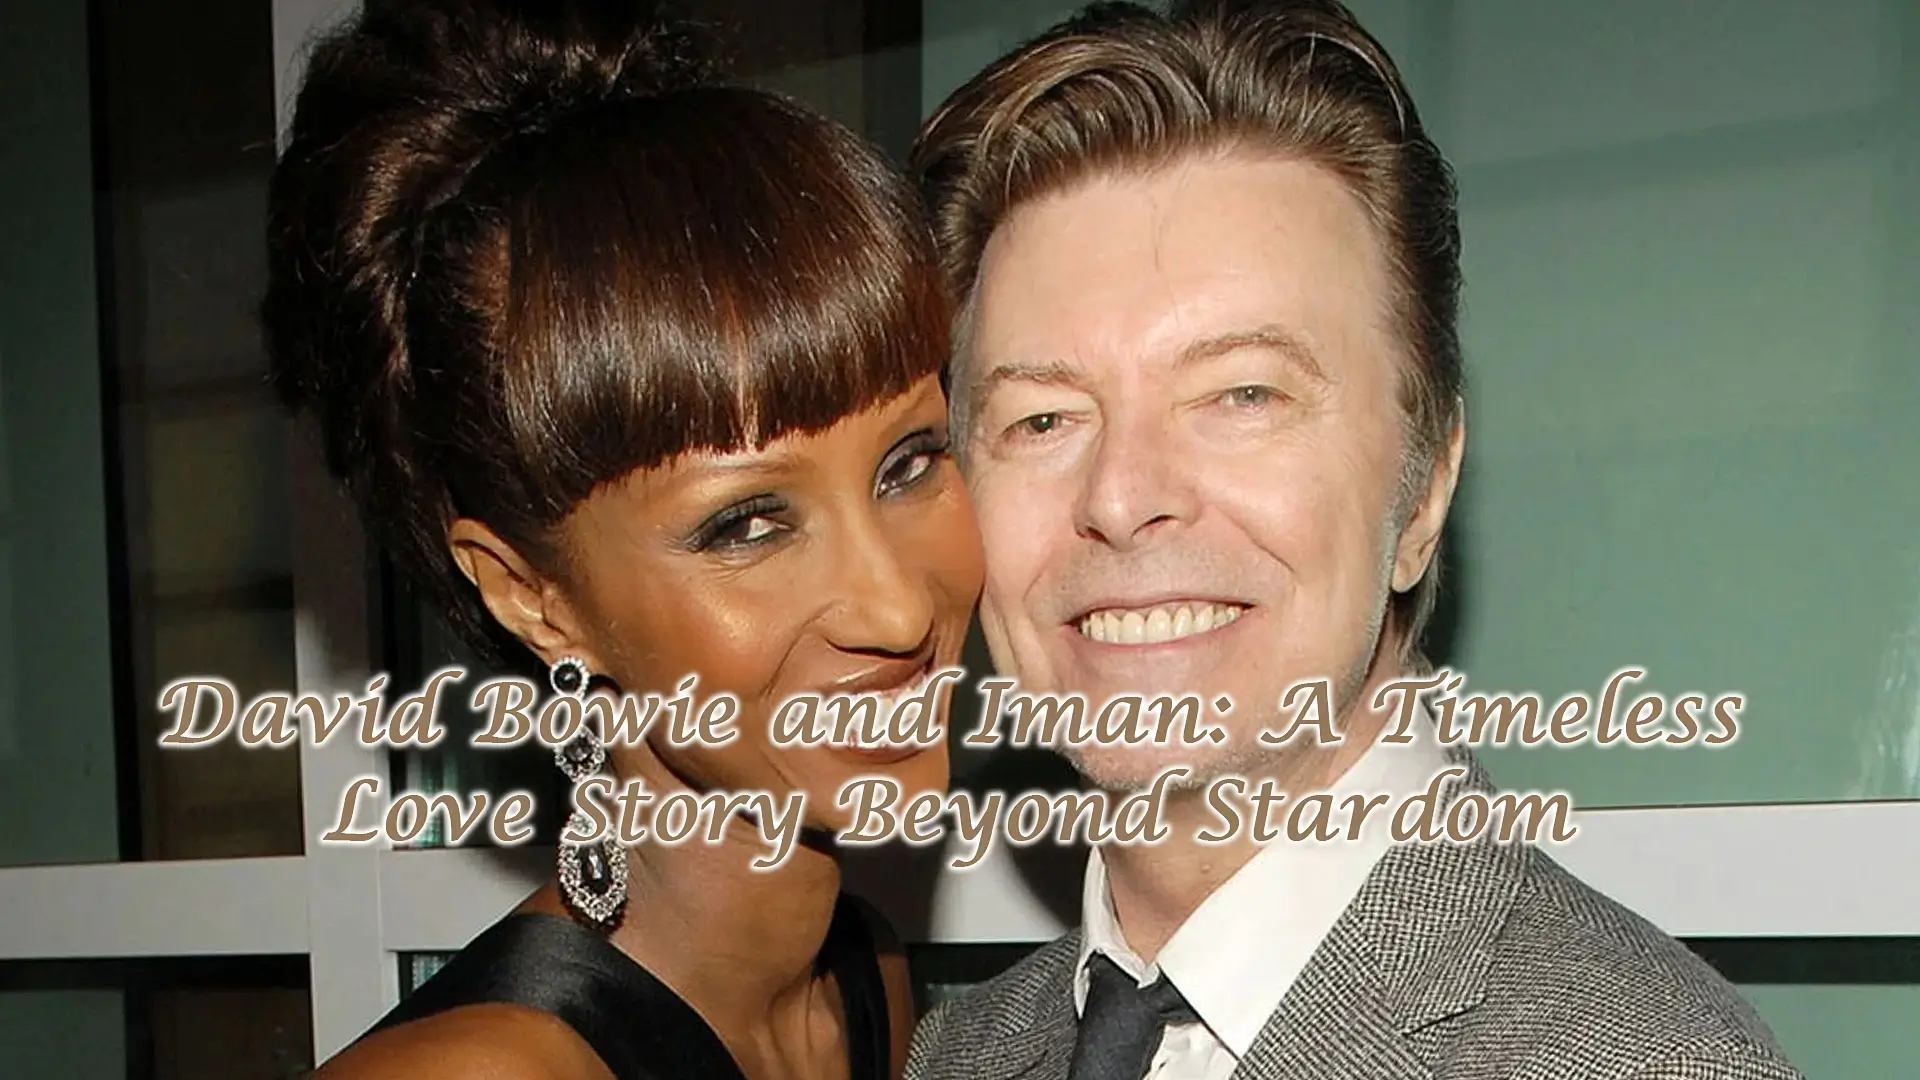 David Bowie and Iman: A Timeless Love Story Beyond Stardom